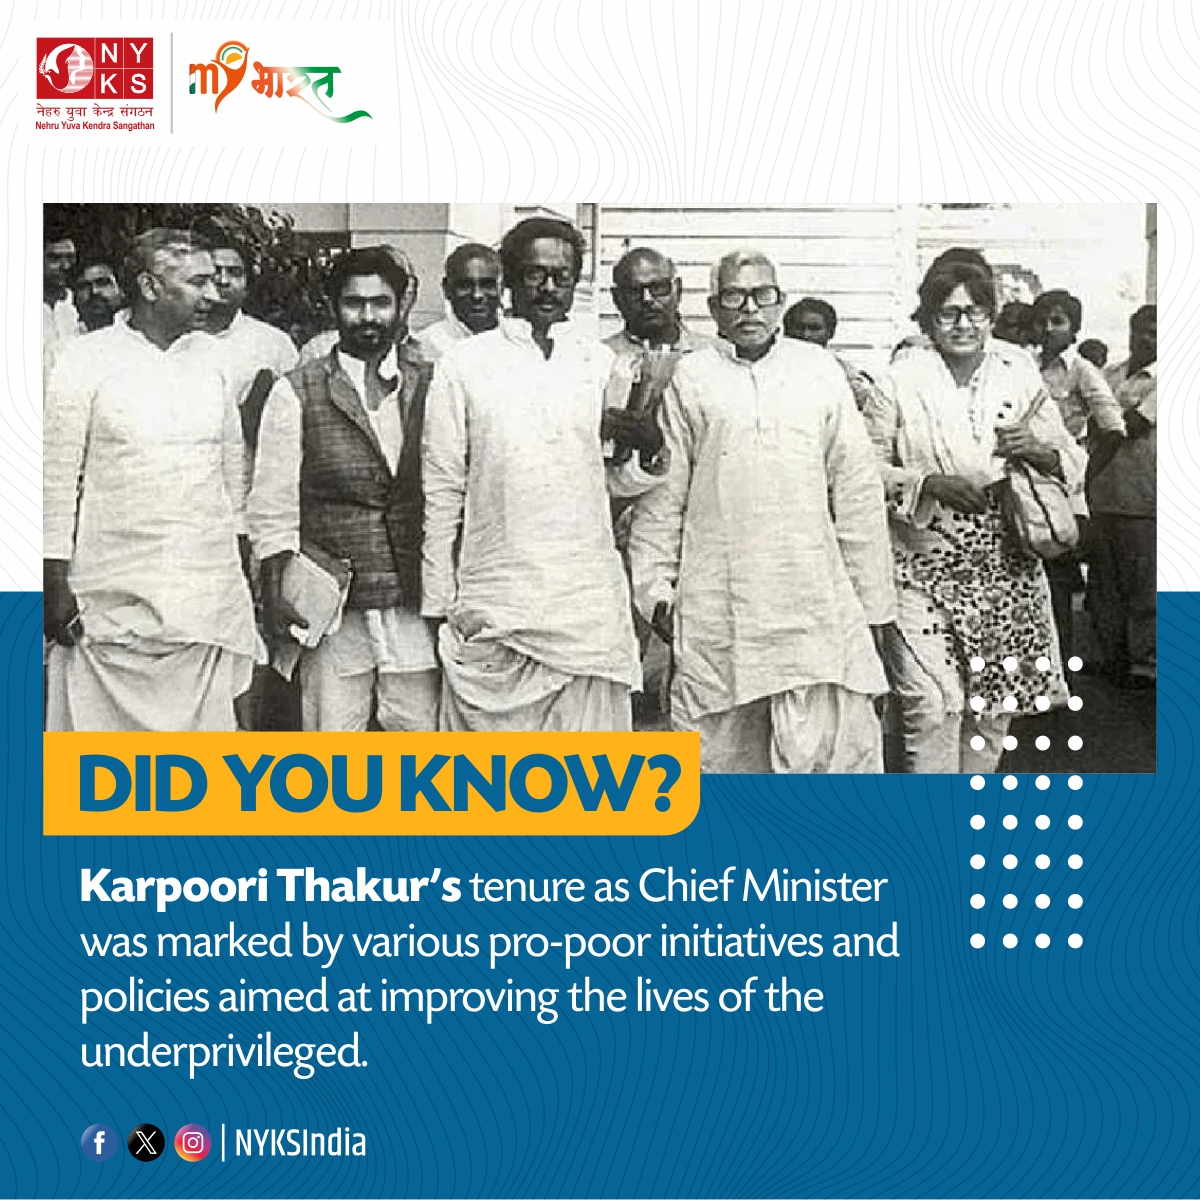 Did you know? Karpoori Thakur, former Chief Minister of Bihar, left an indelible mark on Indian politics with his commitment to social justice and reforms. Introduced the Prohibition of alcohol, his legacy continues to inspire generations. #KarpooriThakur #DidYouKnow #NYKS